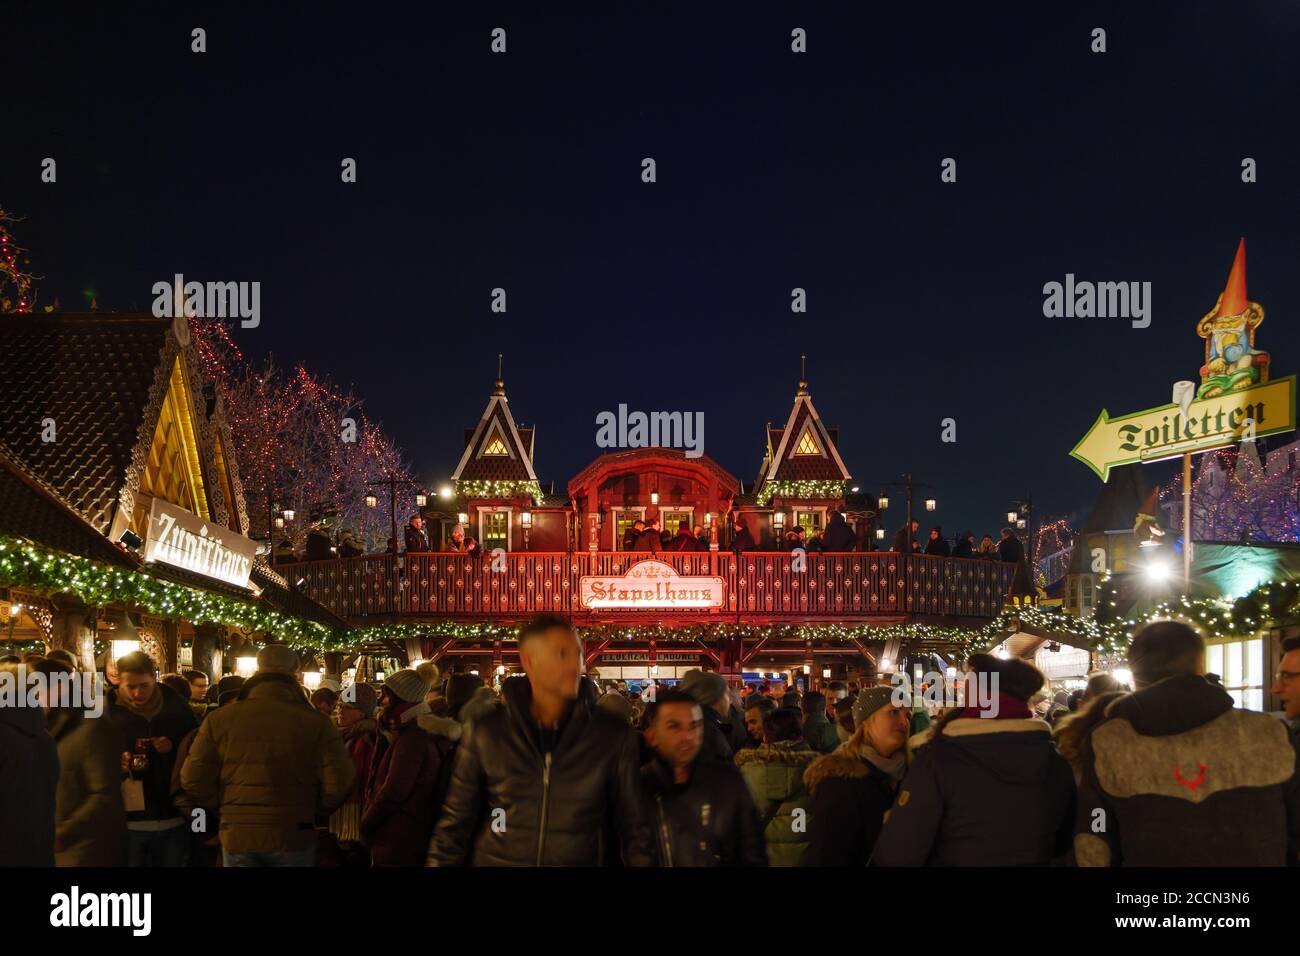 Night atmosphere with crowd of people surrounded with beer house at Heumarkt, famous Christmas market square in Köln. Stock Photo